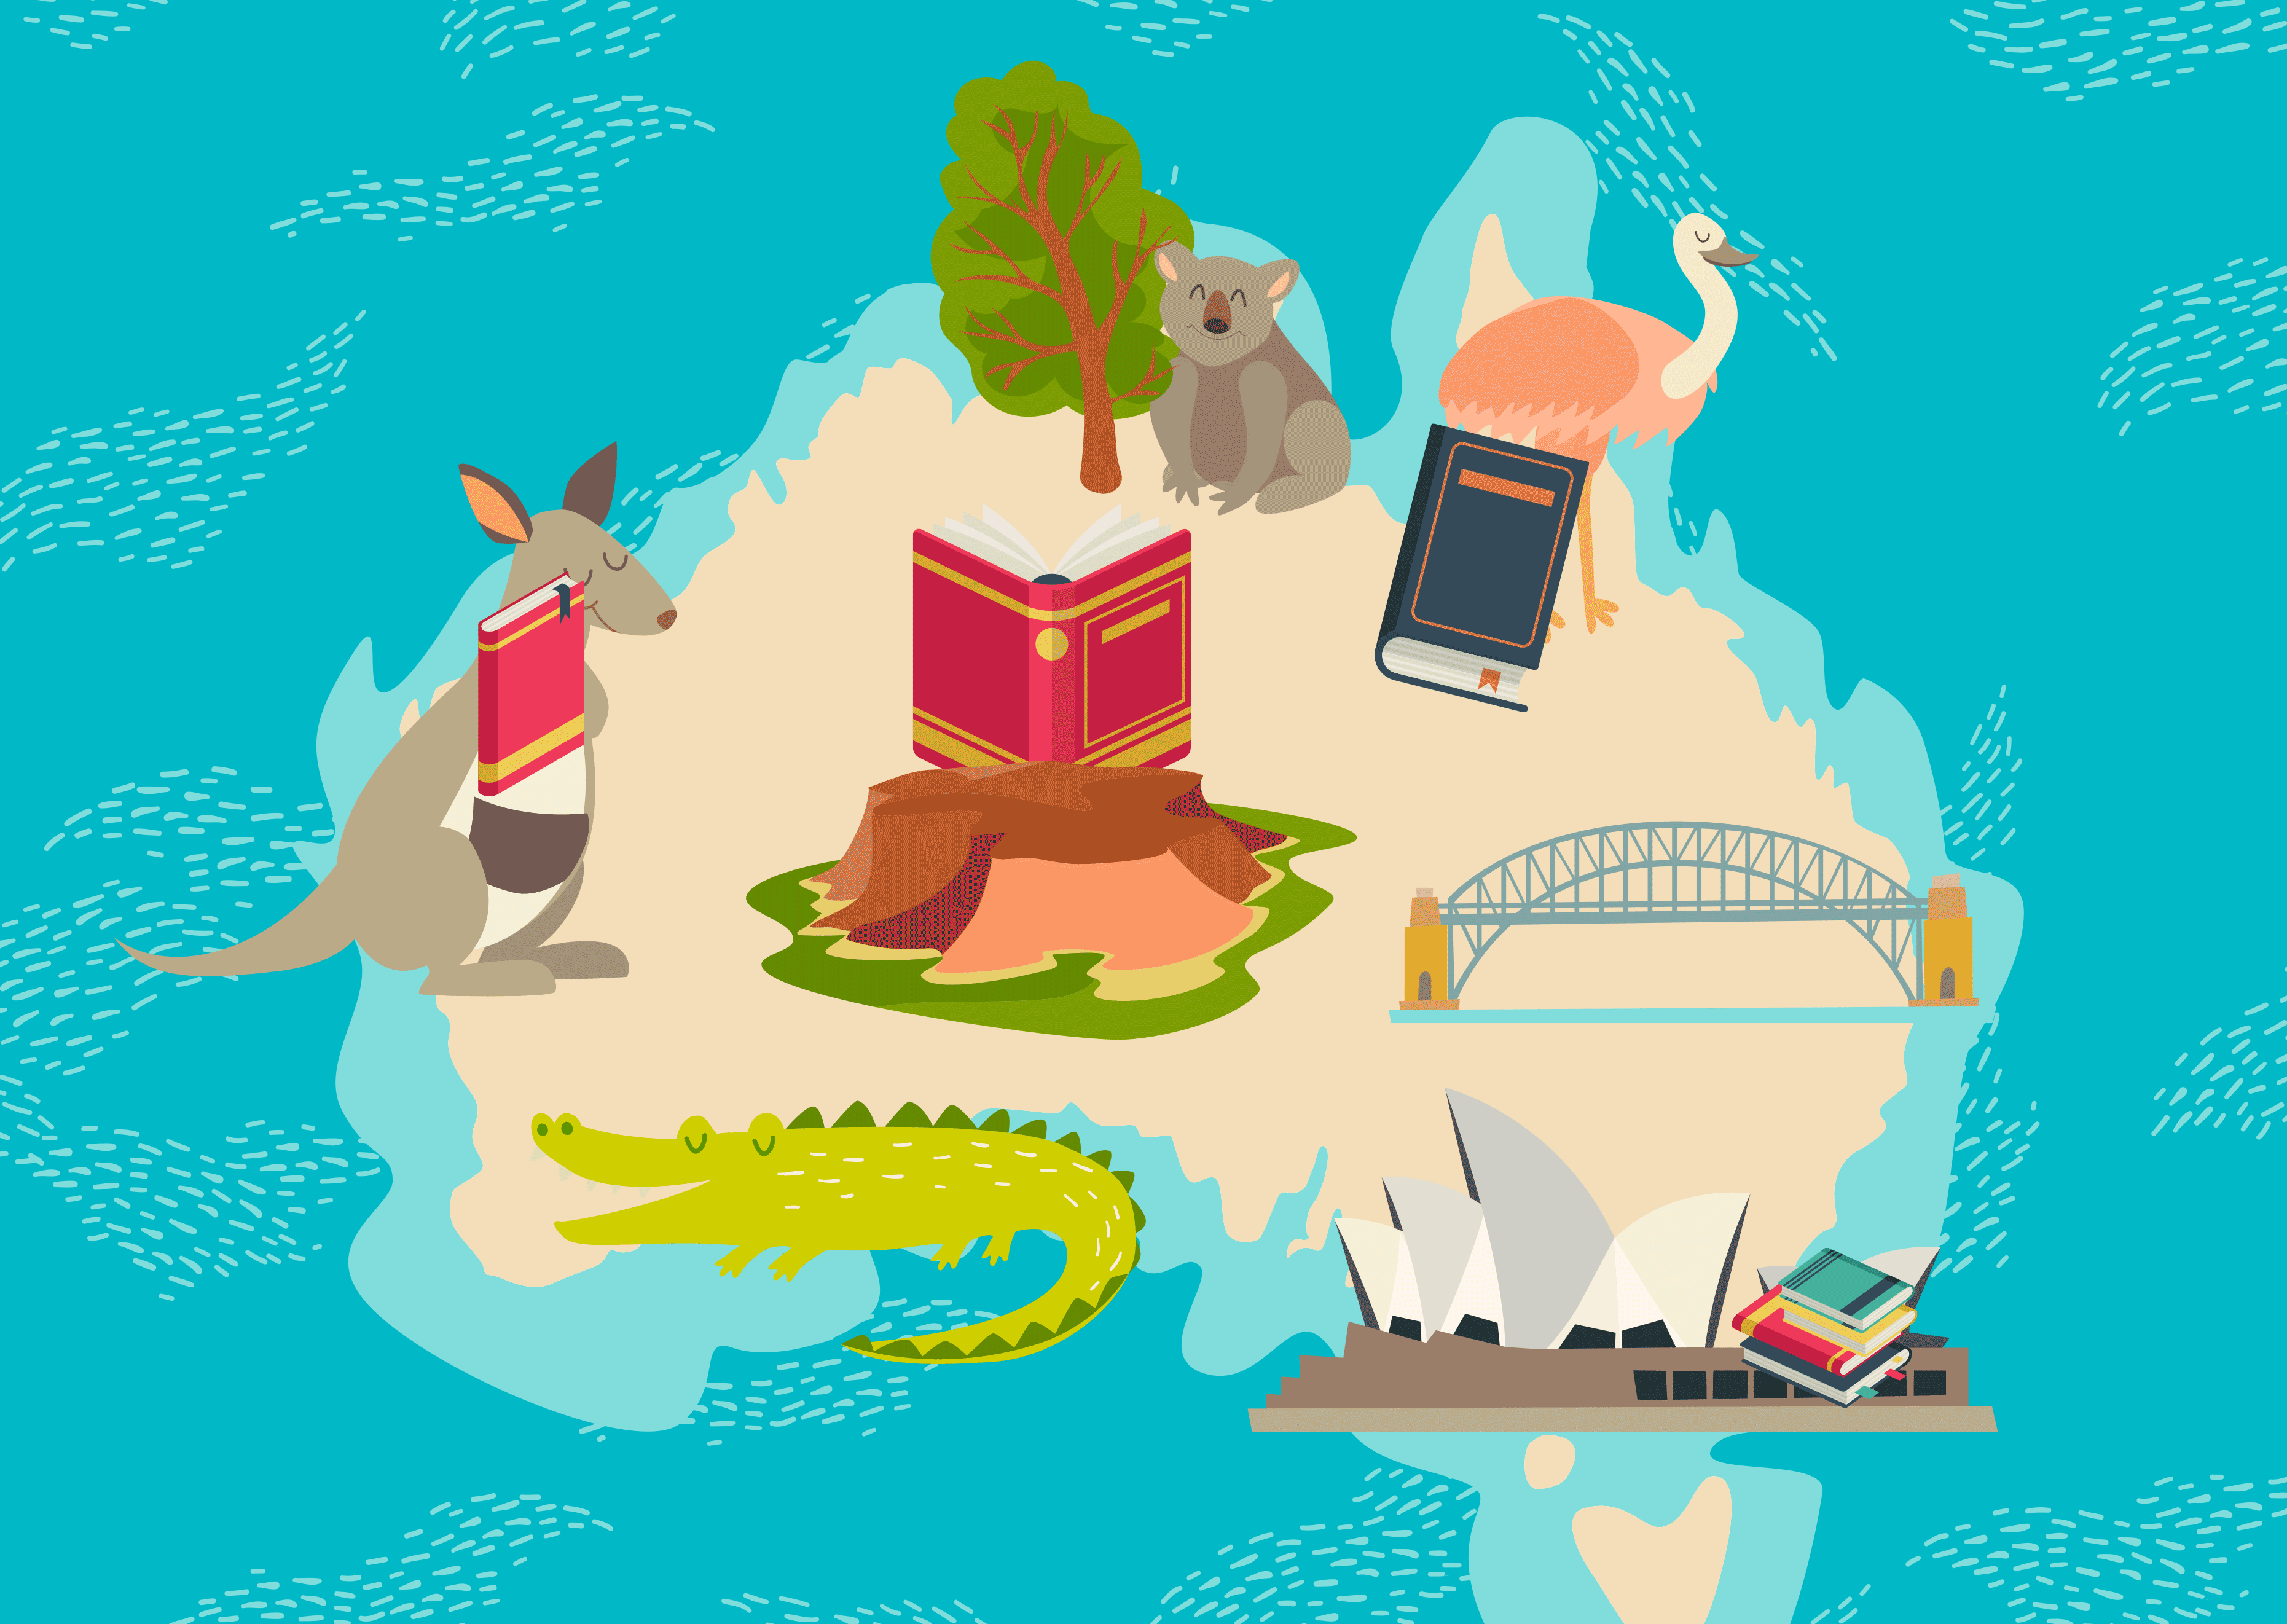 Animation of books emerging from a kangaroo’s pouch, the Sydney Opera House, a crocodile’s mouth, and more.